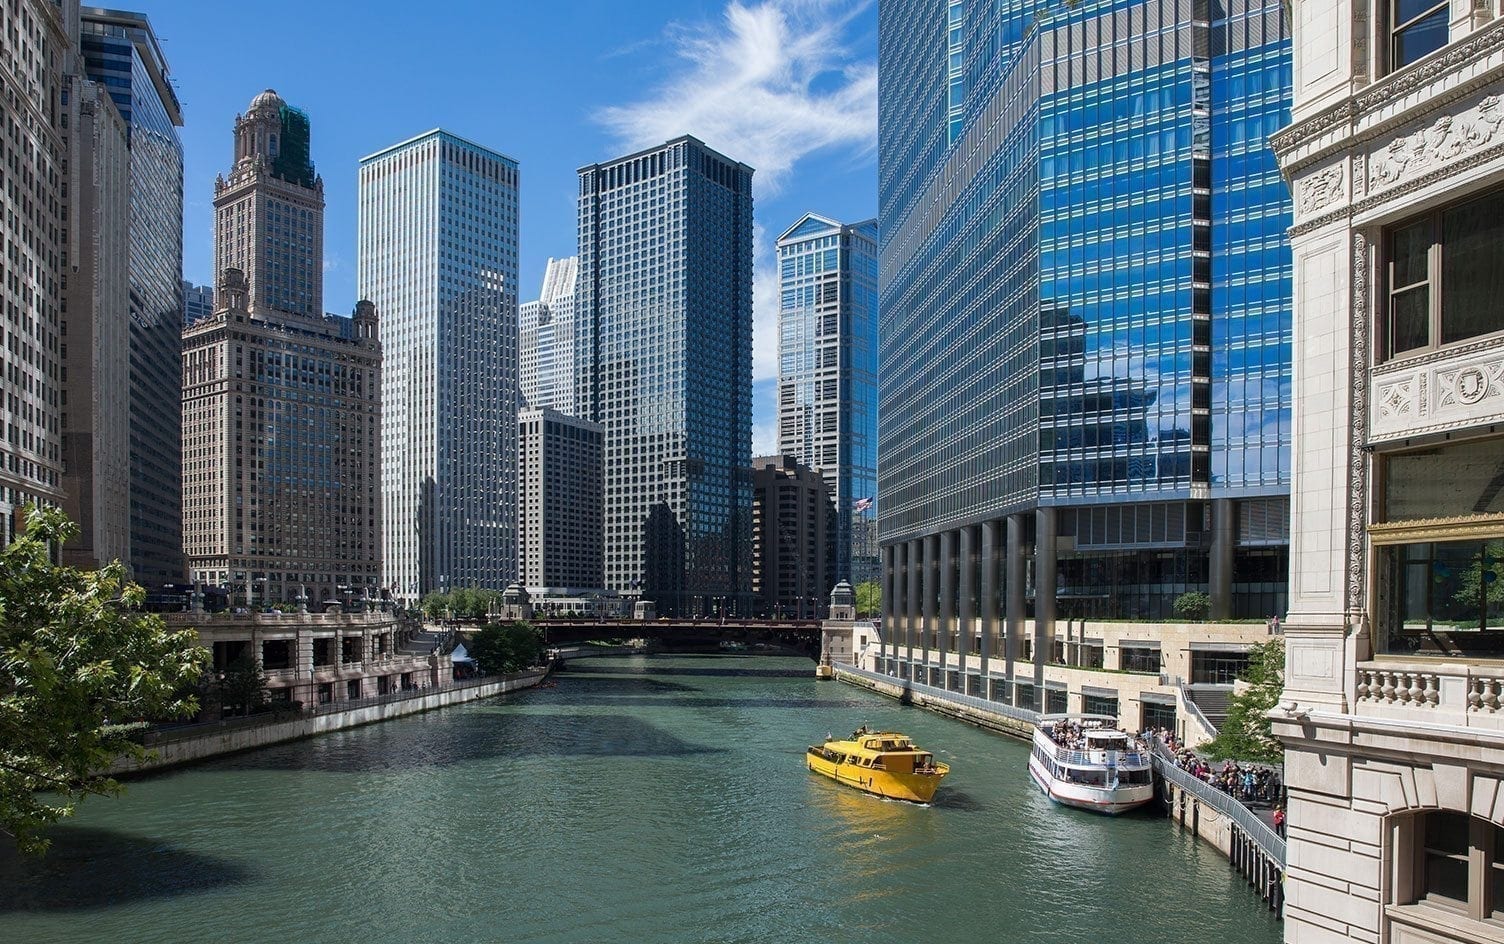 A view of a city river in Chicago surrounded by tall buildings on a sunny day. A yellow water taxi and a white boat are on the river, with people walking along the riverbank. The water appears green, and the sky is blue with scattered clouds. MyFitnessPal Blog